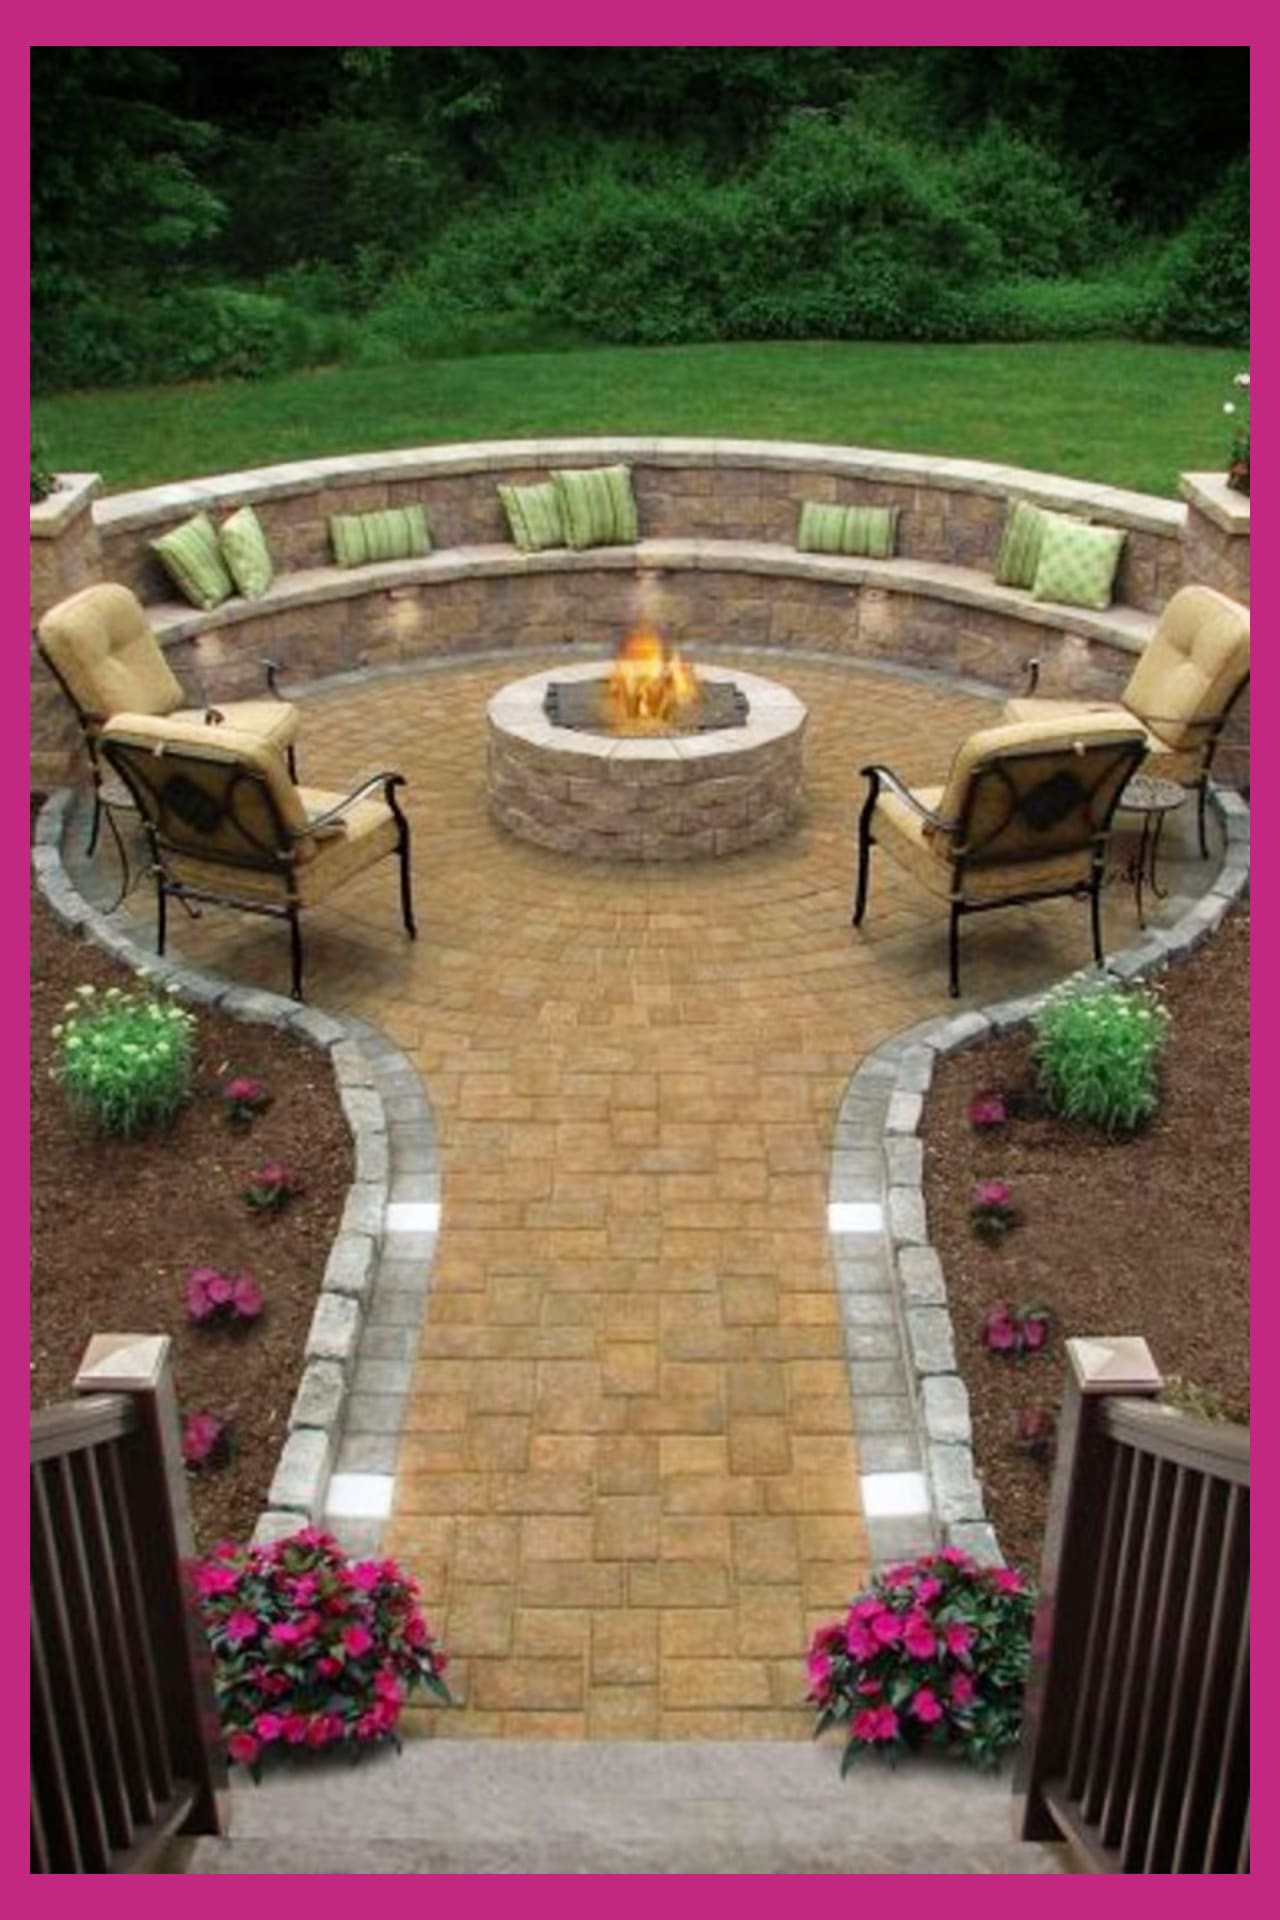 Fire Pit Ideas Fire Pit Seating Ideas, Pictures & Design Ideas For A Backyard Fire Pit